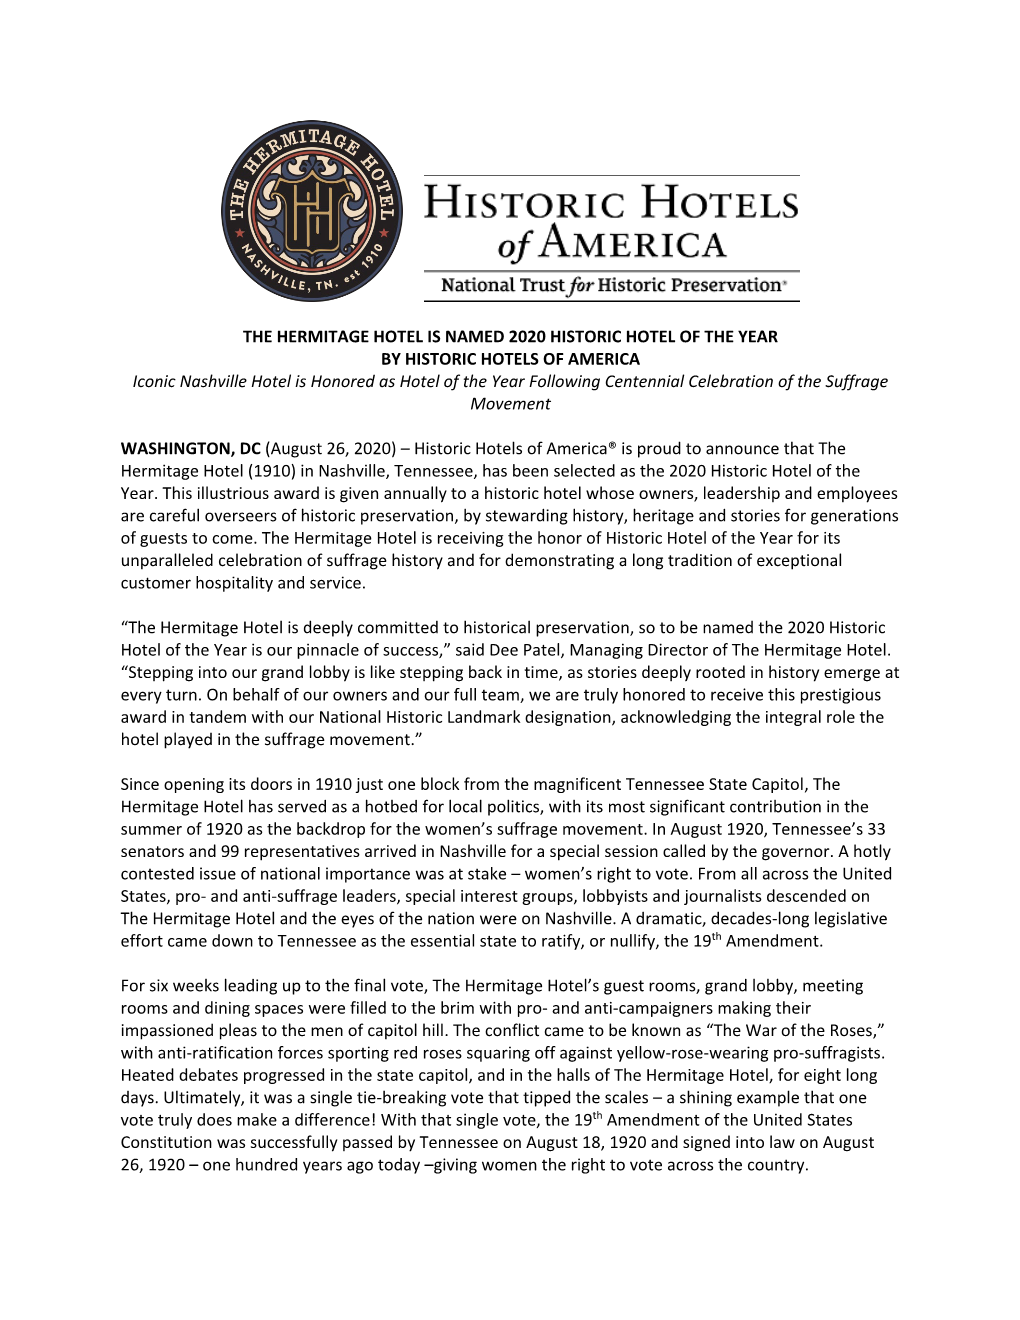 The Hermitage Hotel Is Named 2020 Historic Hotel of The